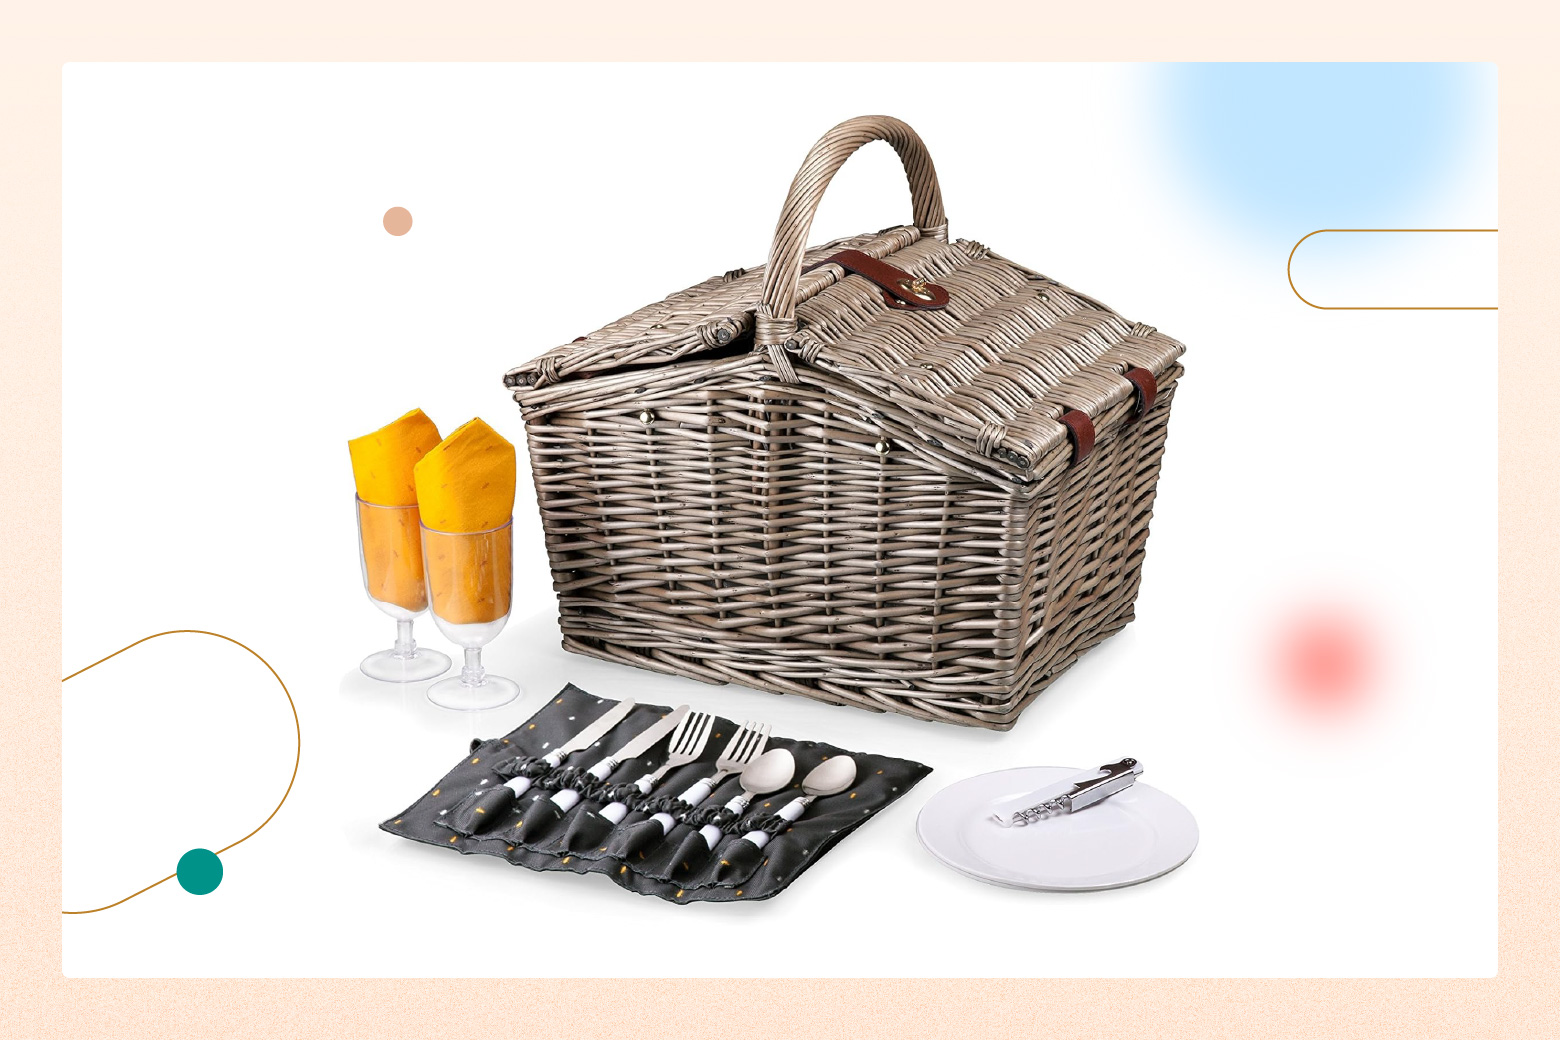 product photo of picnic basket set, with silverware, plates, corkscrew, and 2 goblets with yellow napkins